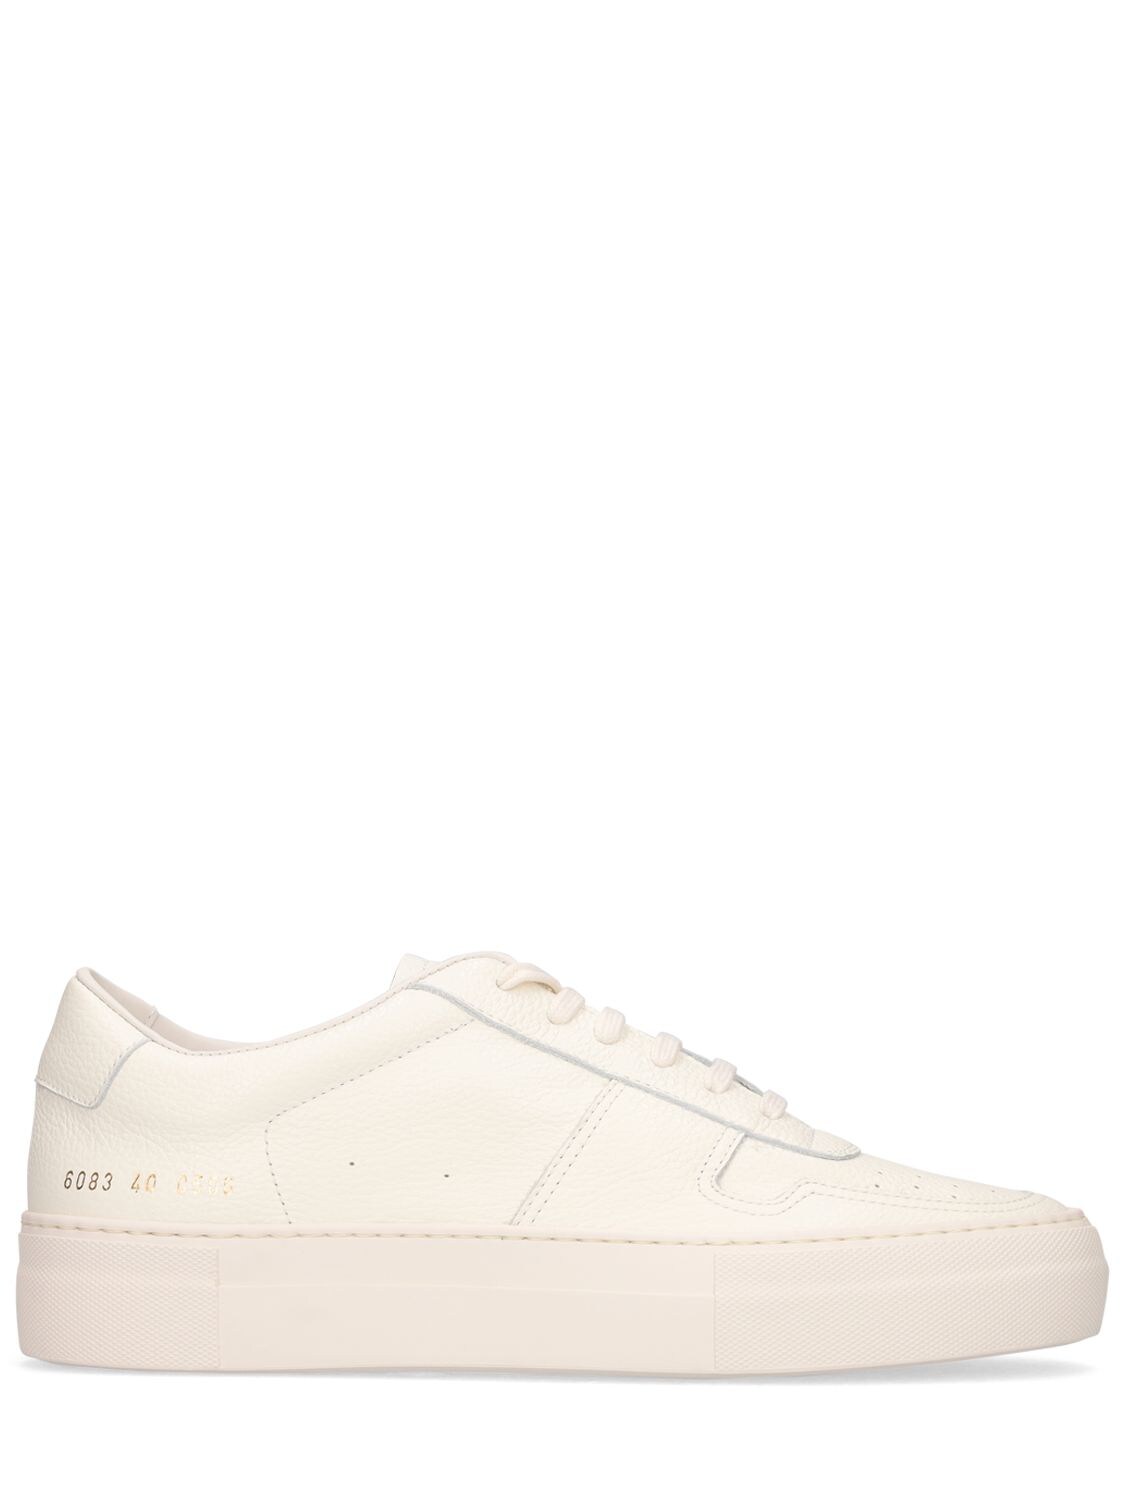 Brall Summer Leather Sneakers